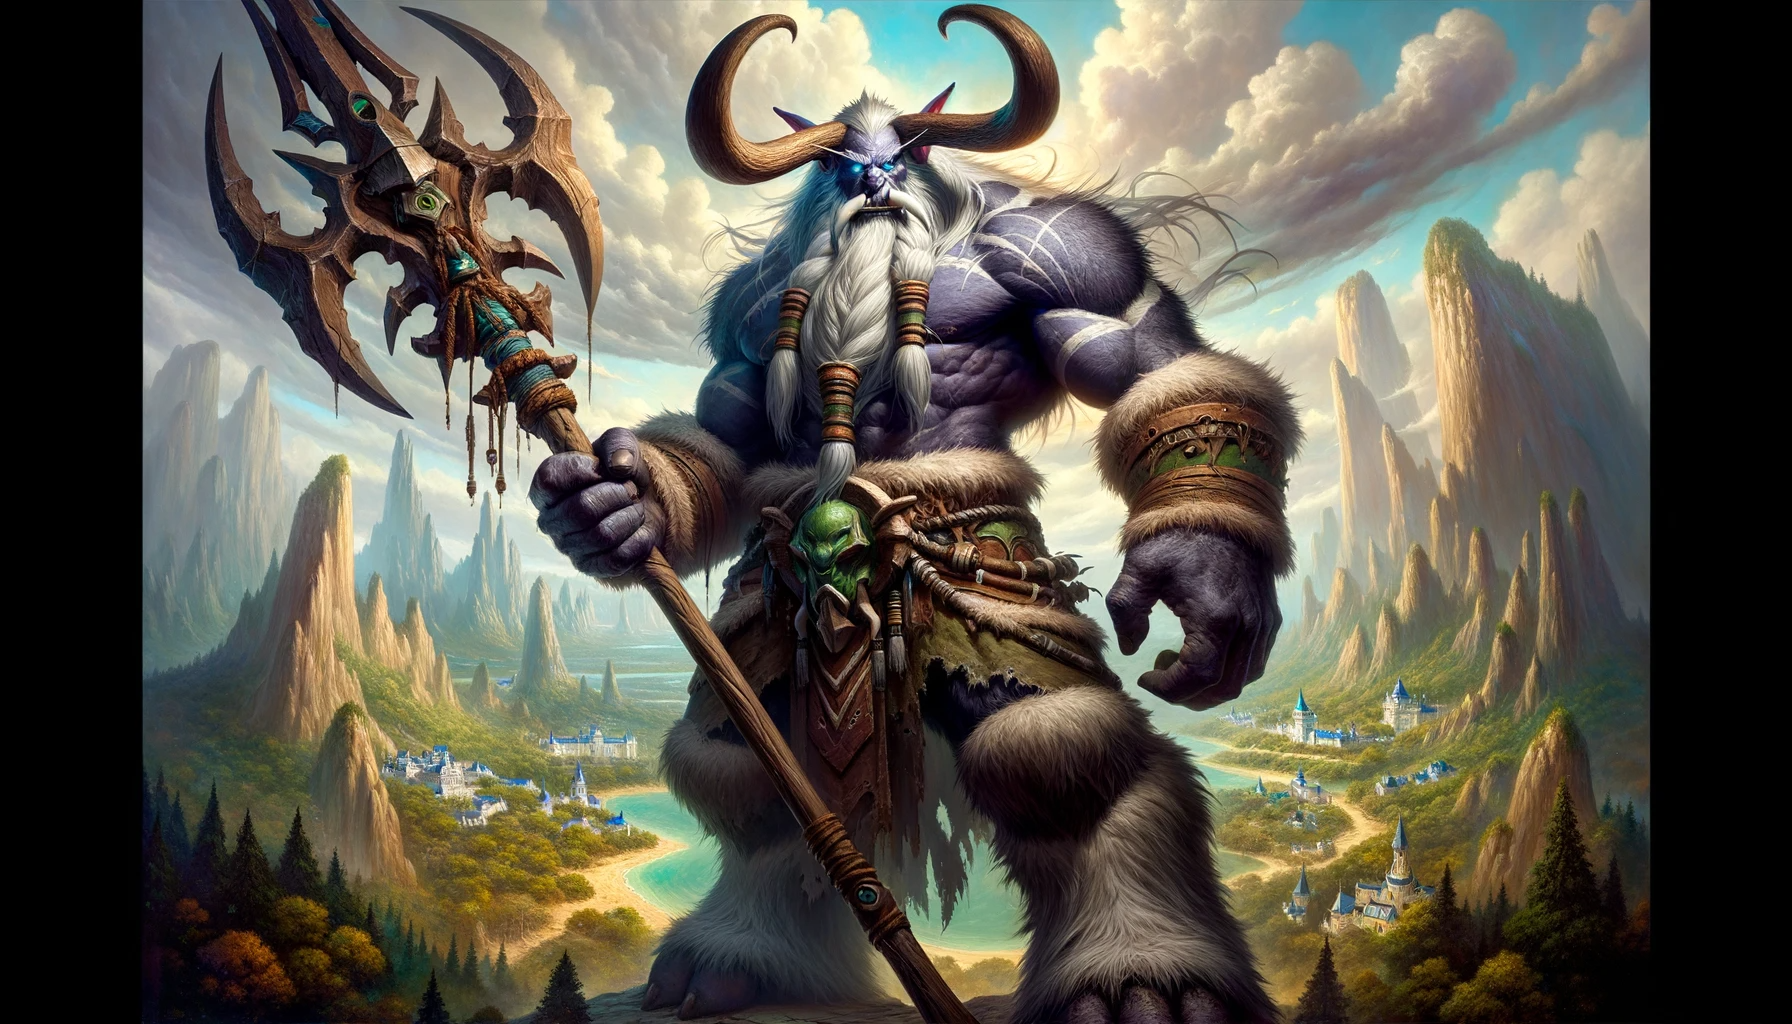 Beardirty, the towering Night Elf Guardian Druid, stands confidently. His spear showcases his might, and the landscape behind him alludes to the famous dungeons.